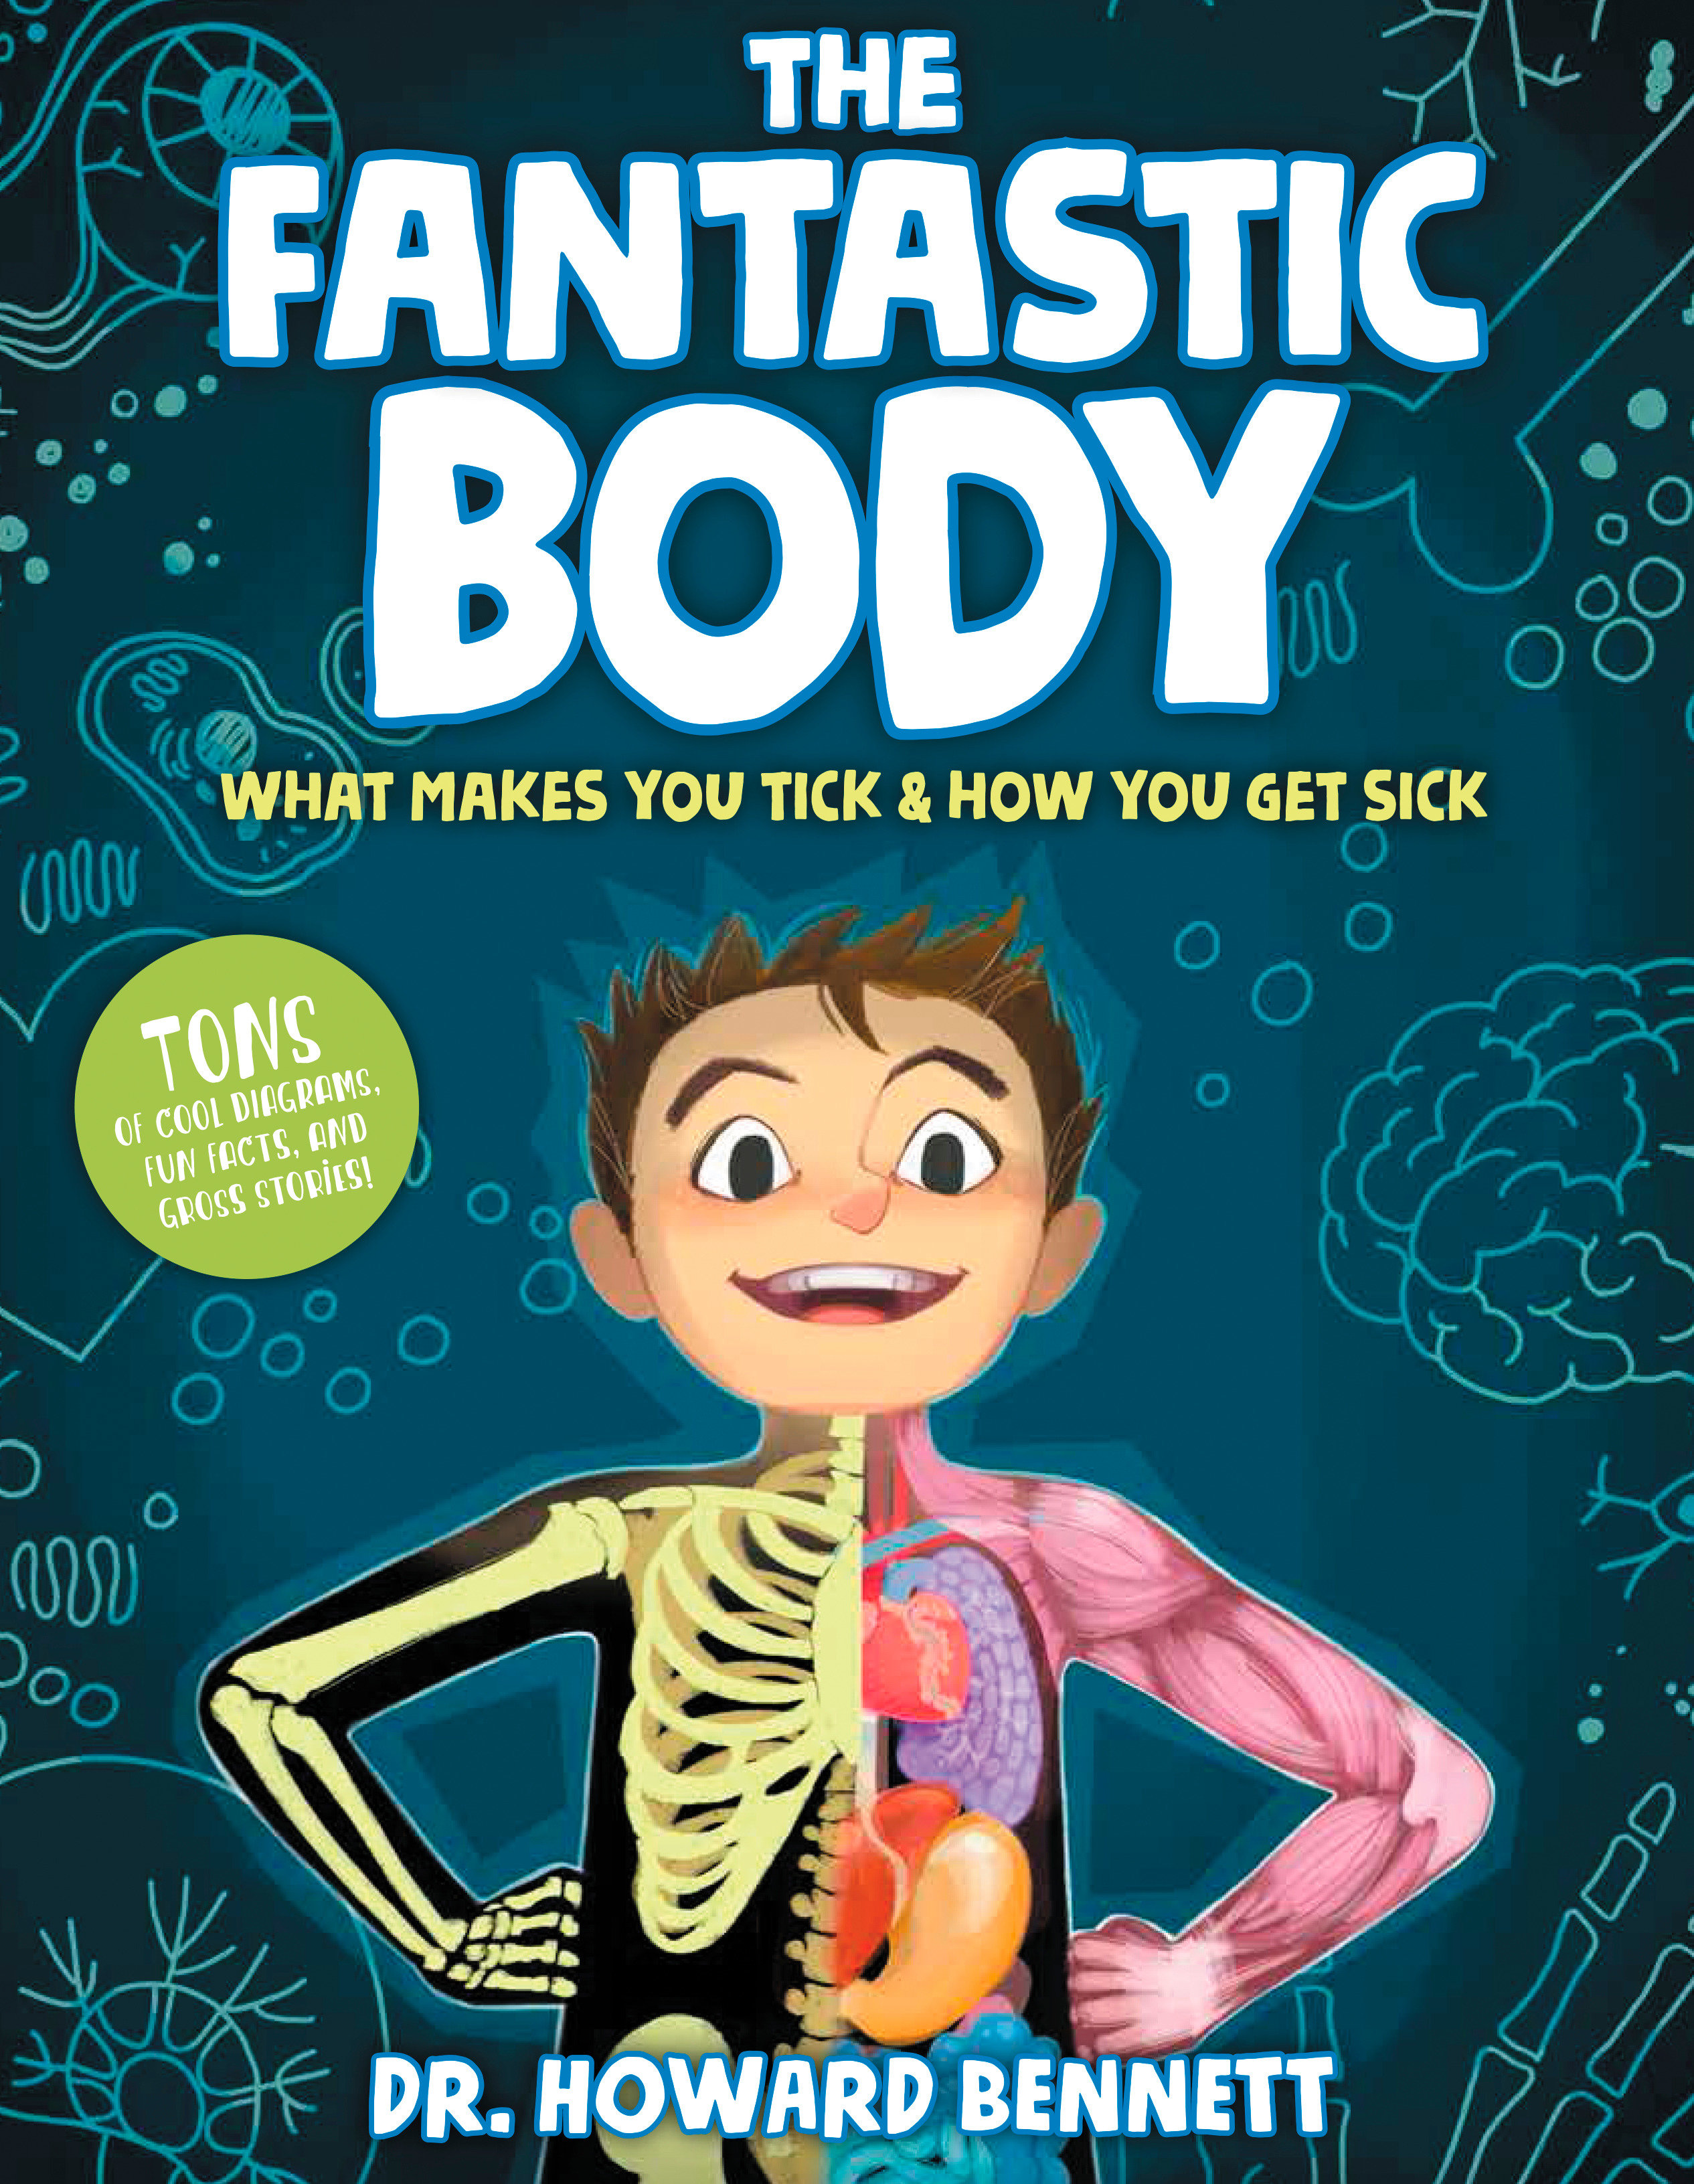 The Fantastic Body (Hardcover Book)